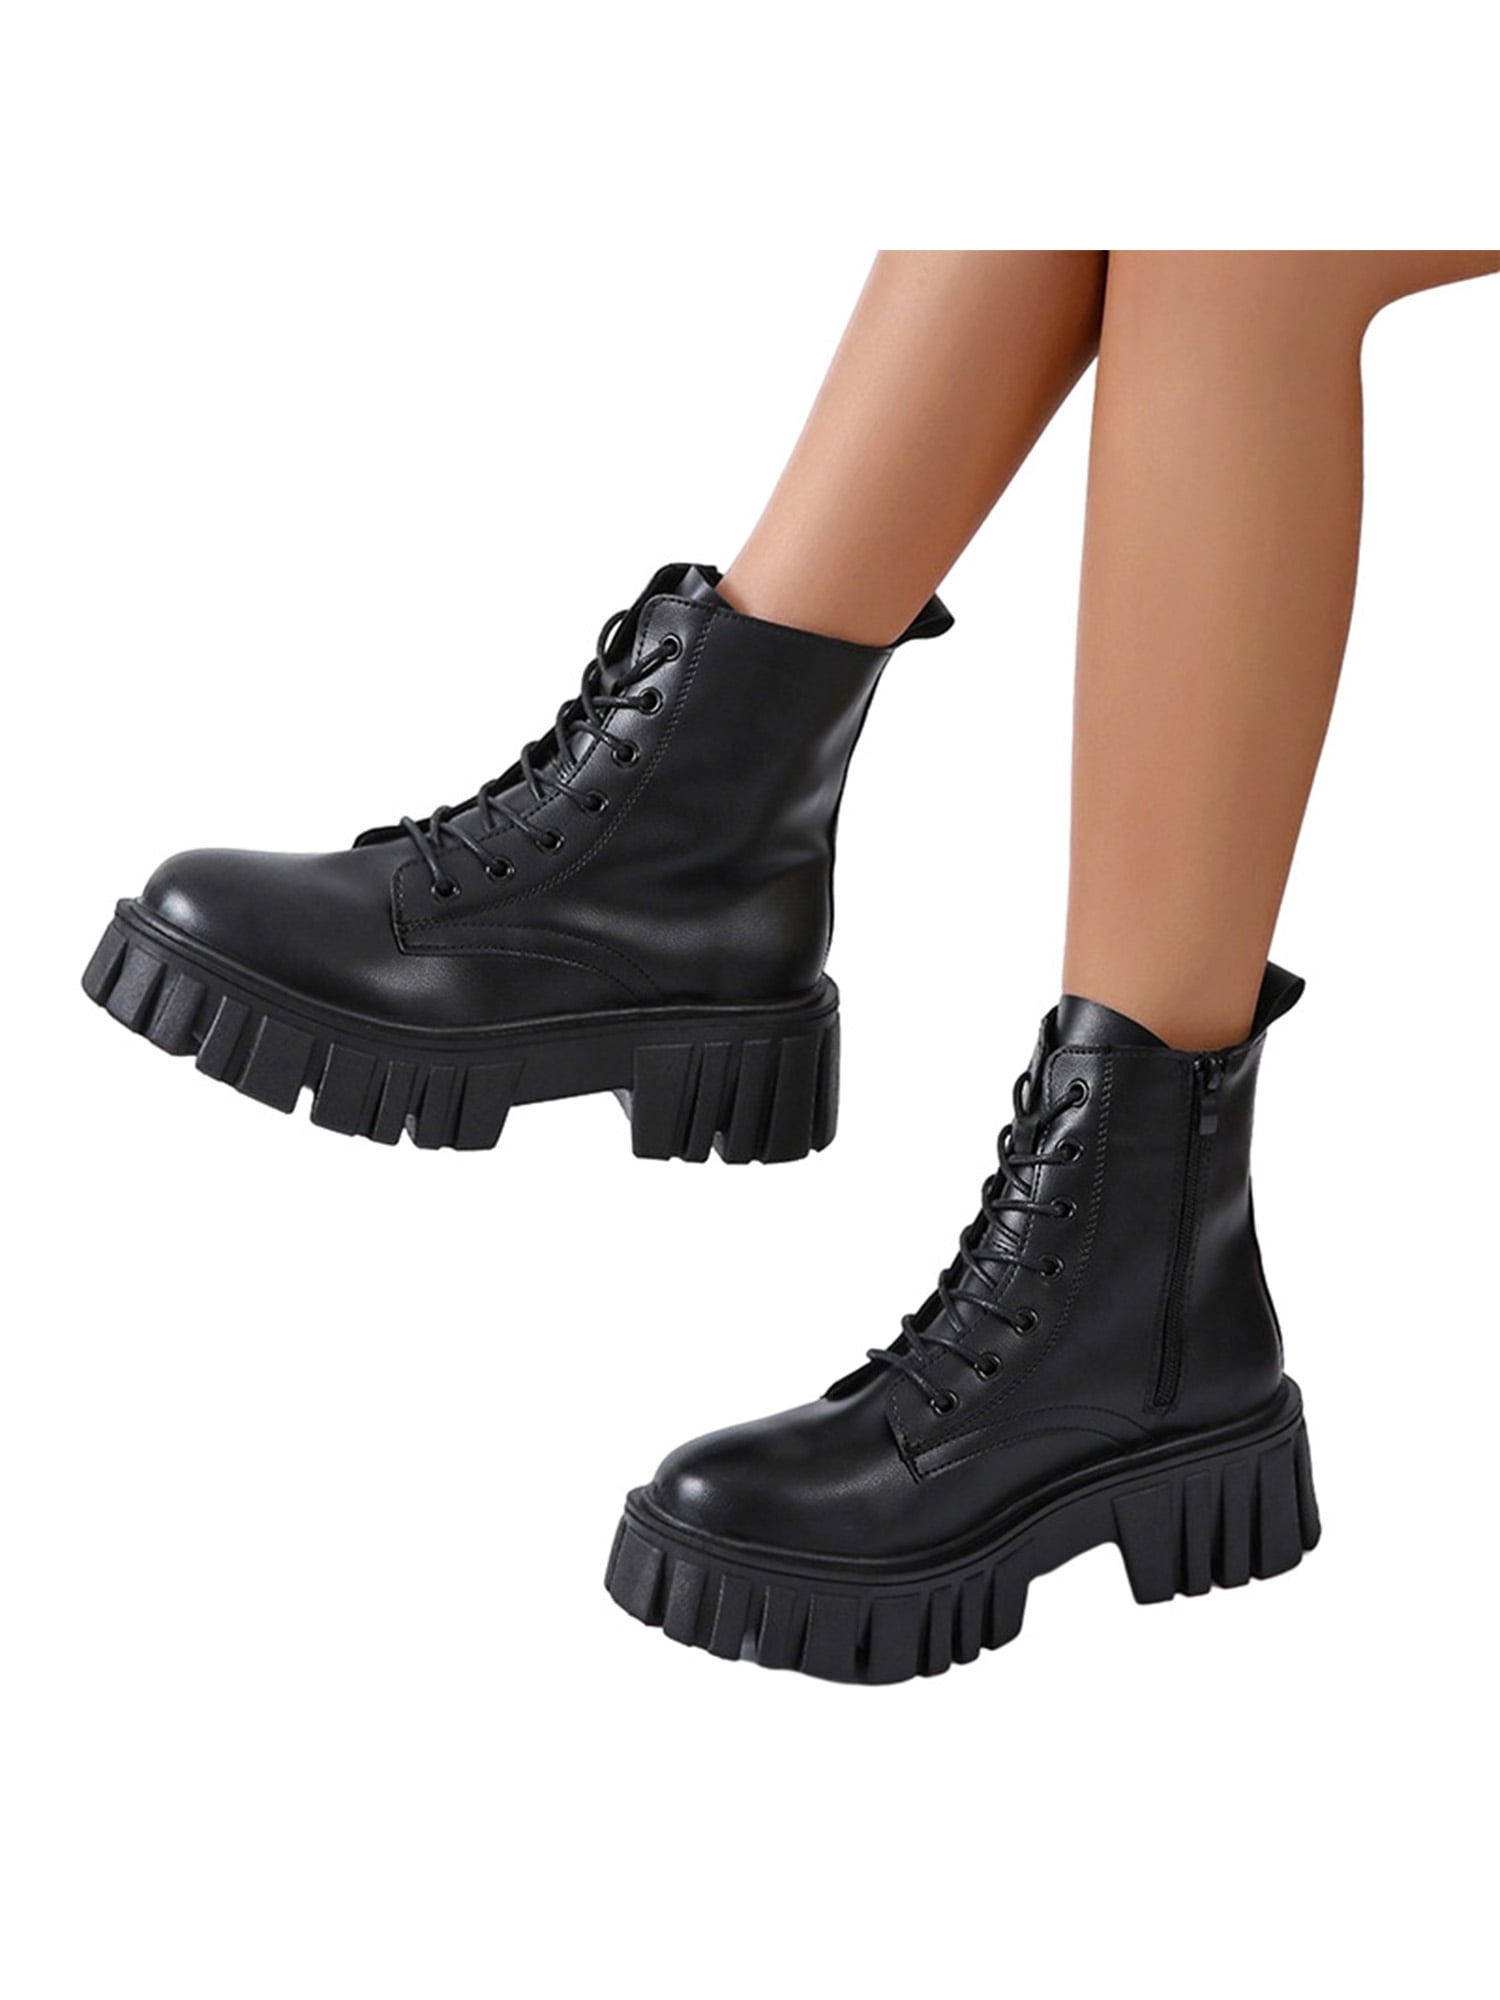 NEW Casual Women's High Heel Round Toe Ankle Knight Boots Lace Up Shoes Size 